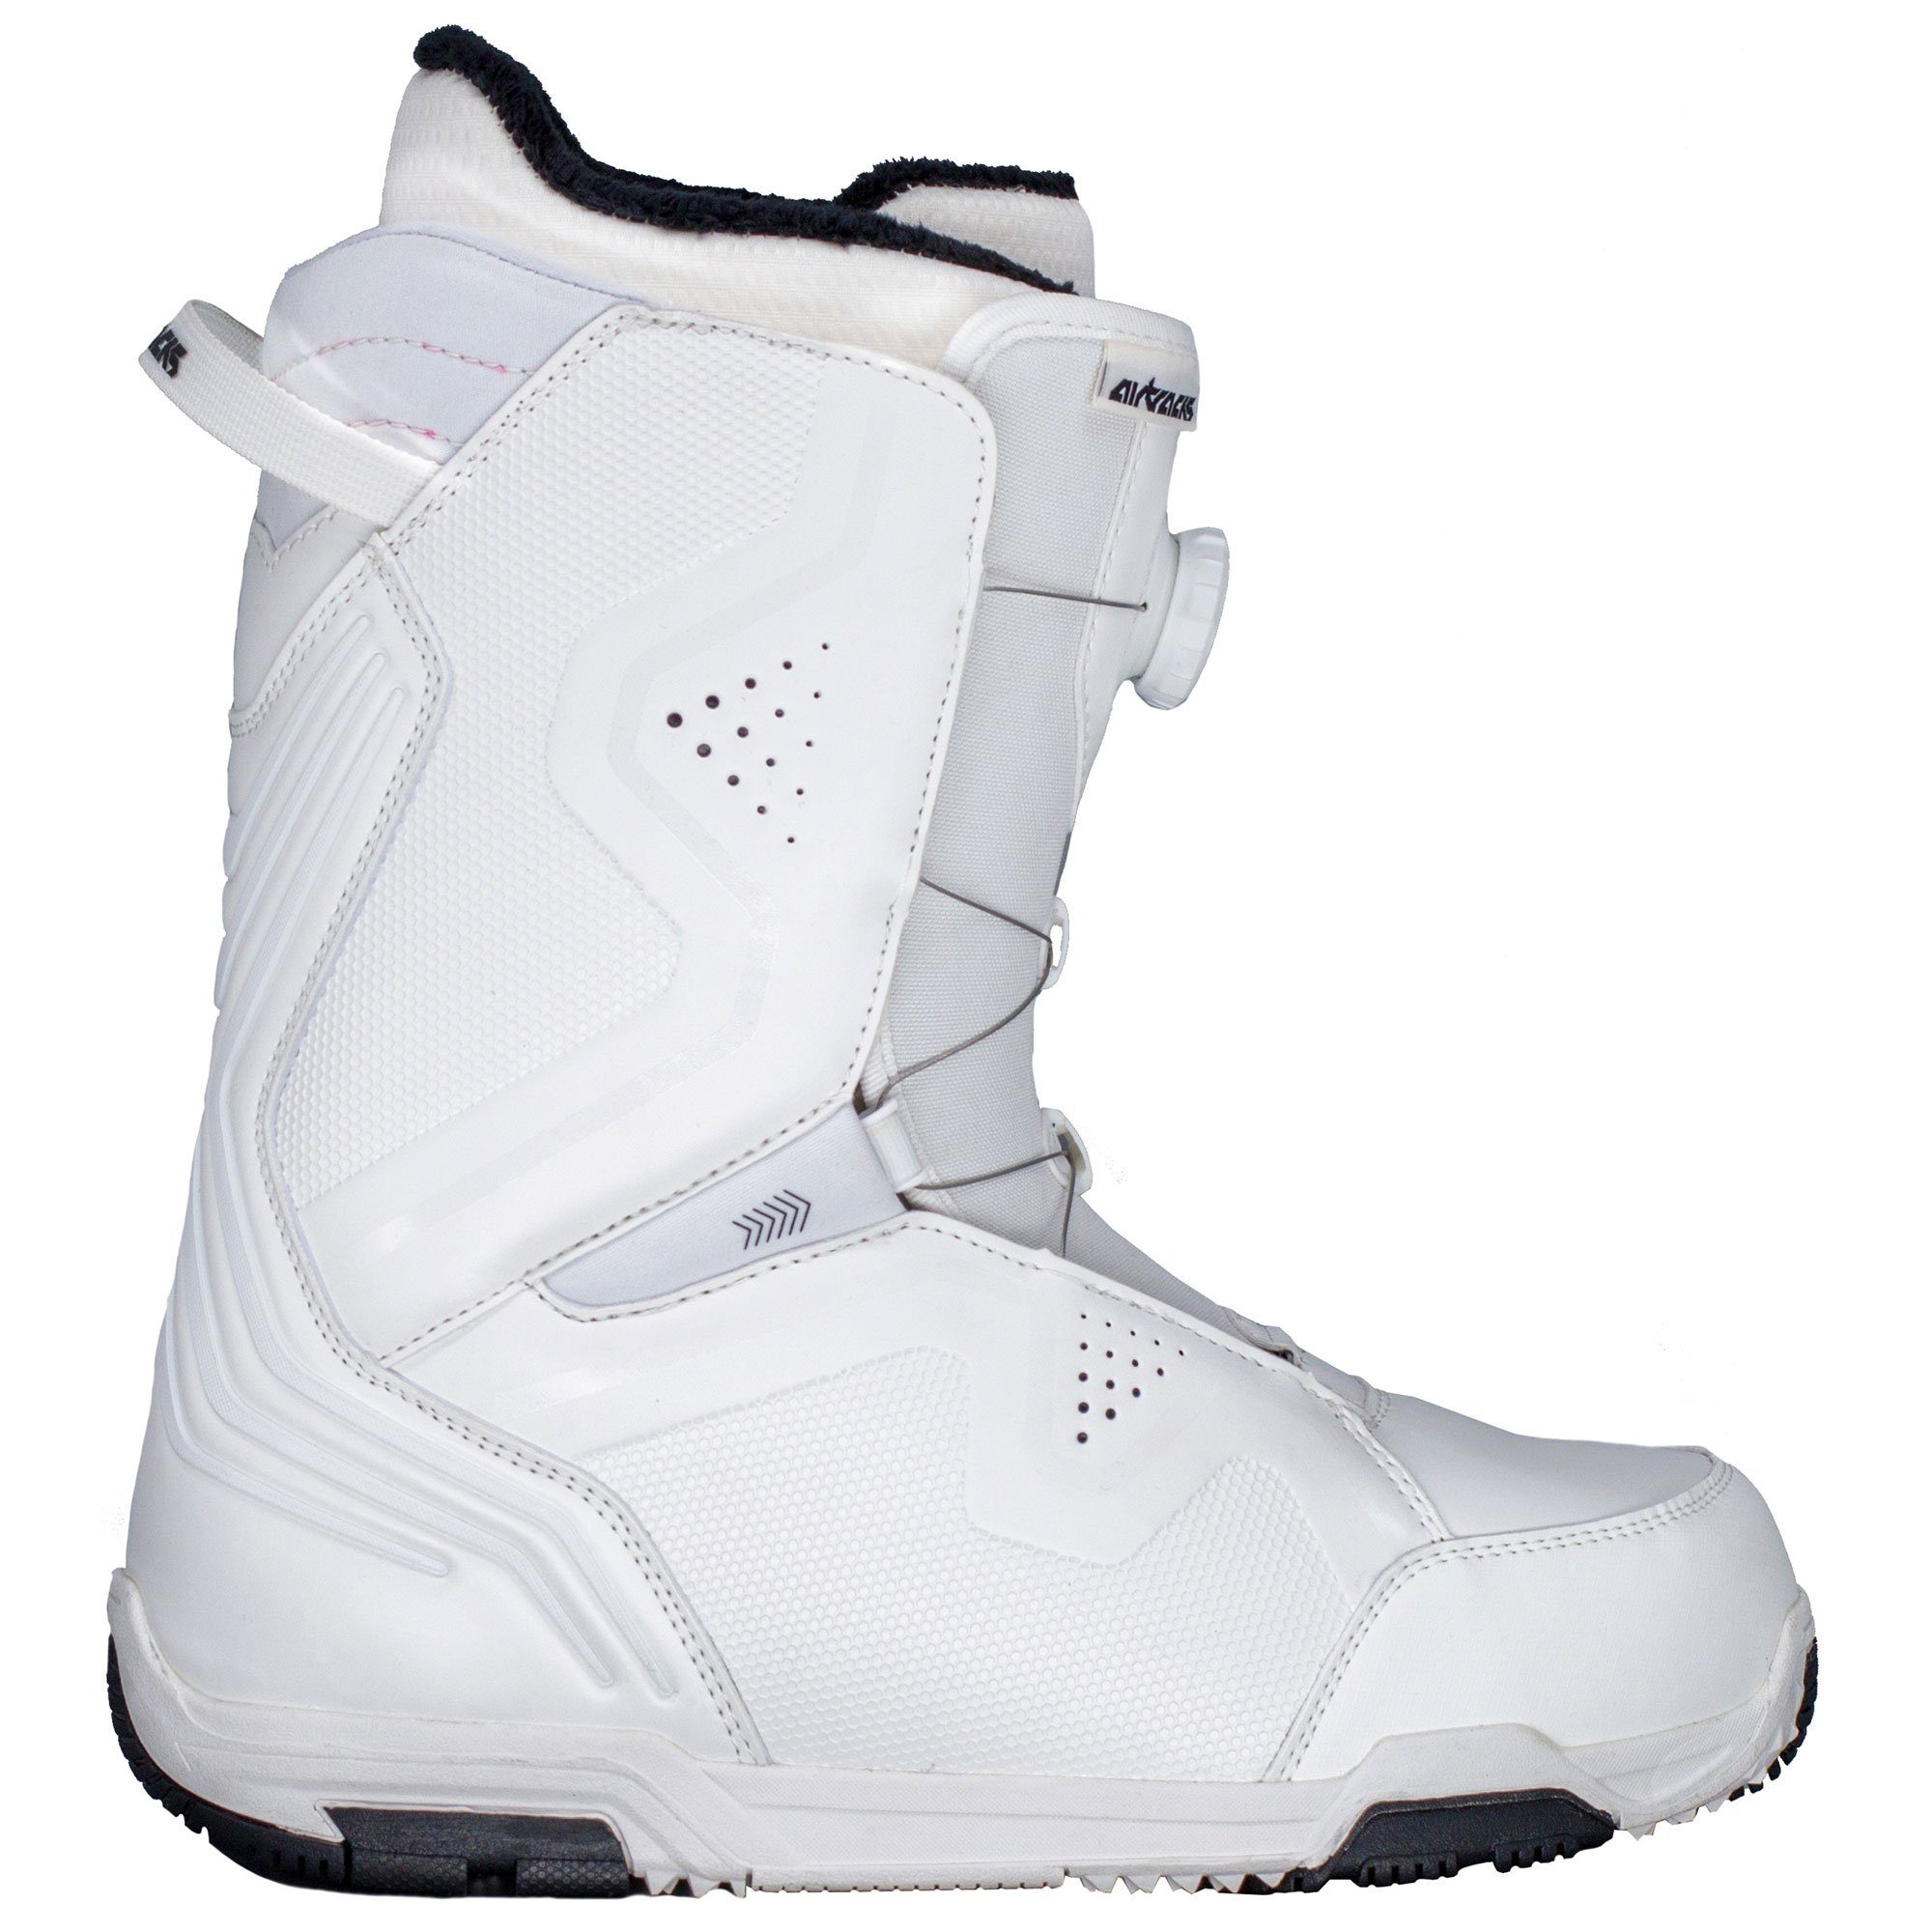 Airtracks Damen Snowboard Boots Strong White Atop 2023 Snowboardboots All Mountain, Freeride - Freestyle / Mod. 2023